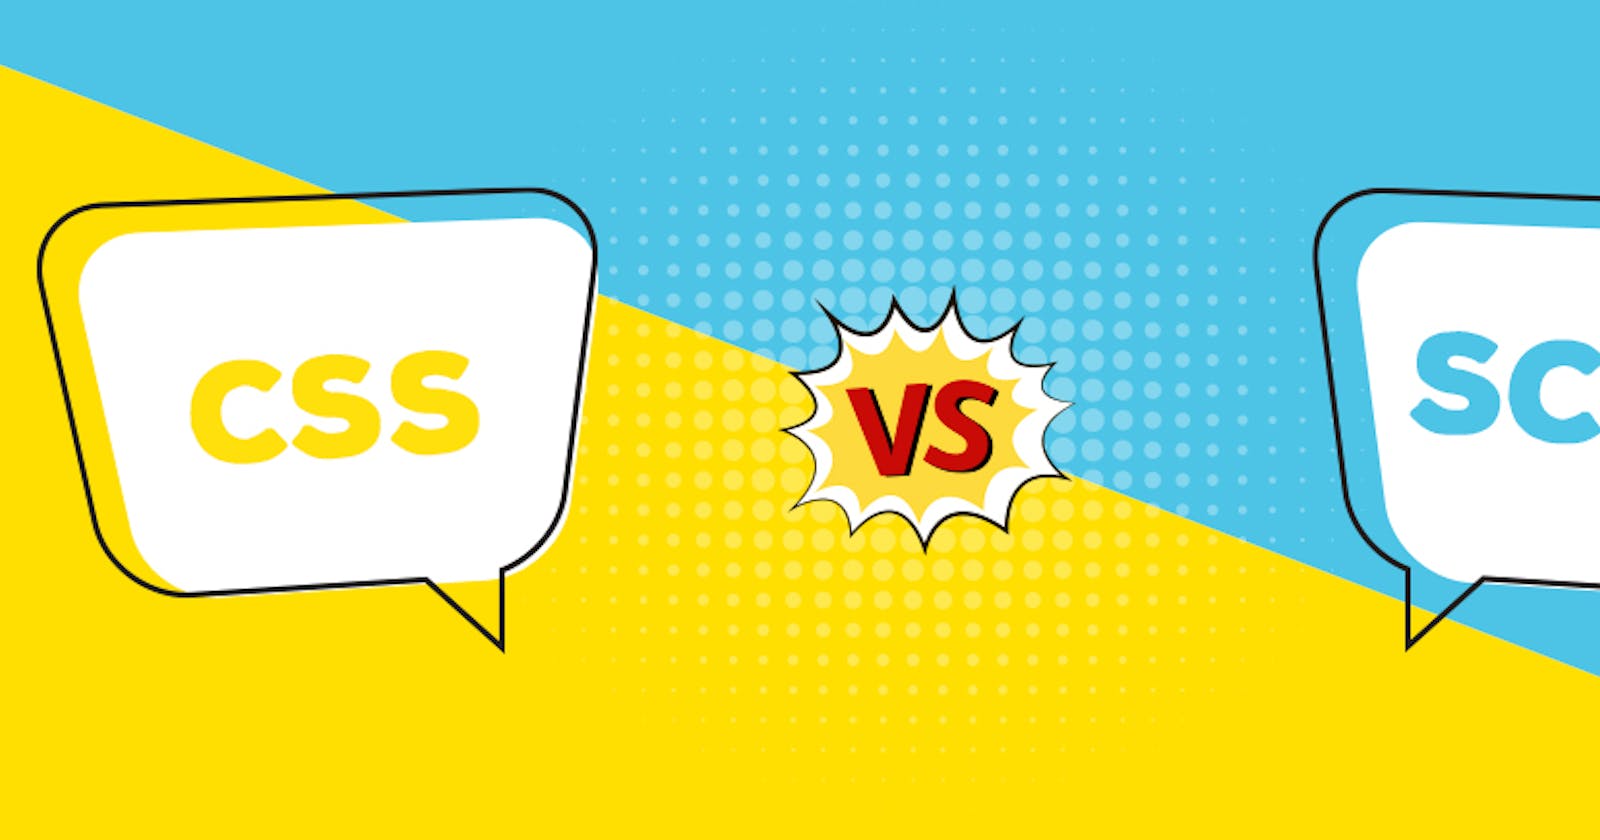 CSS vs SCSS : Know the Complete Difference Between Both